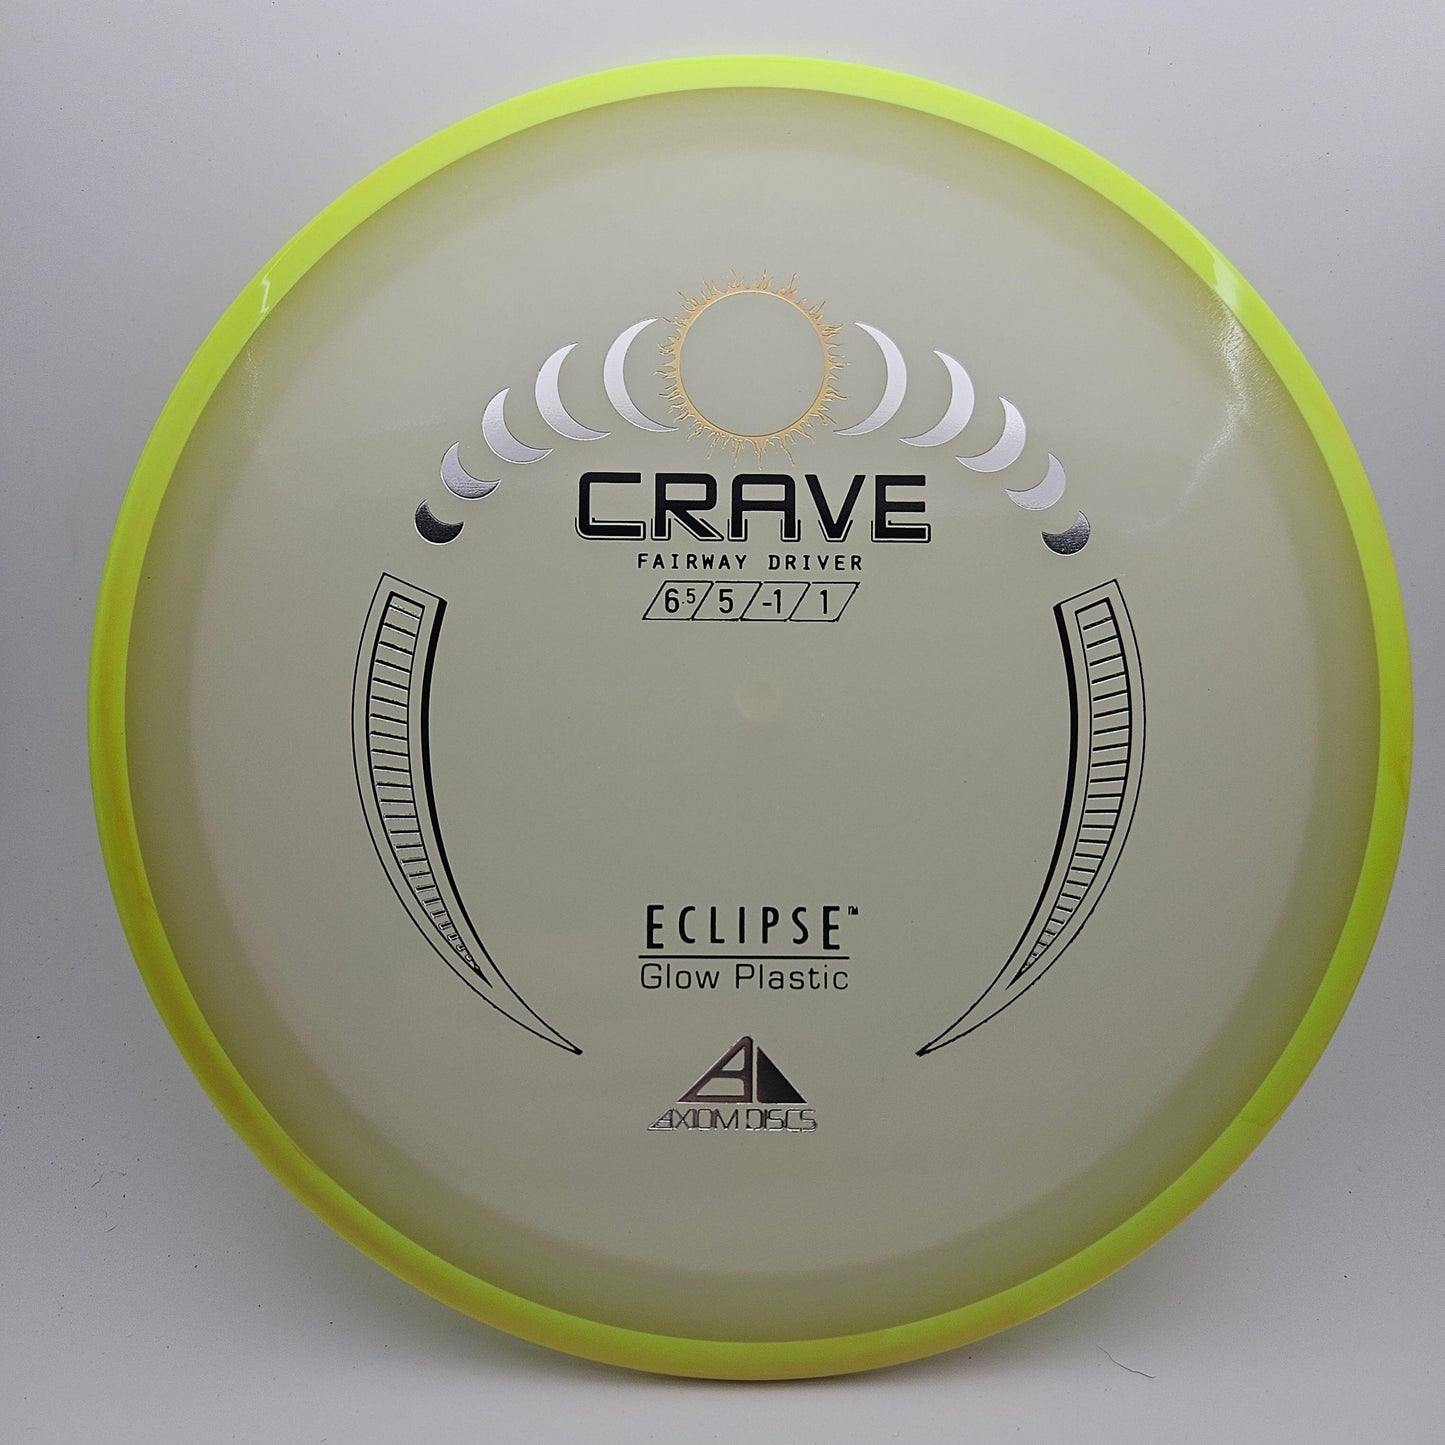 #4771 168g Glow / Yellow Eclipse Crave